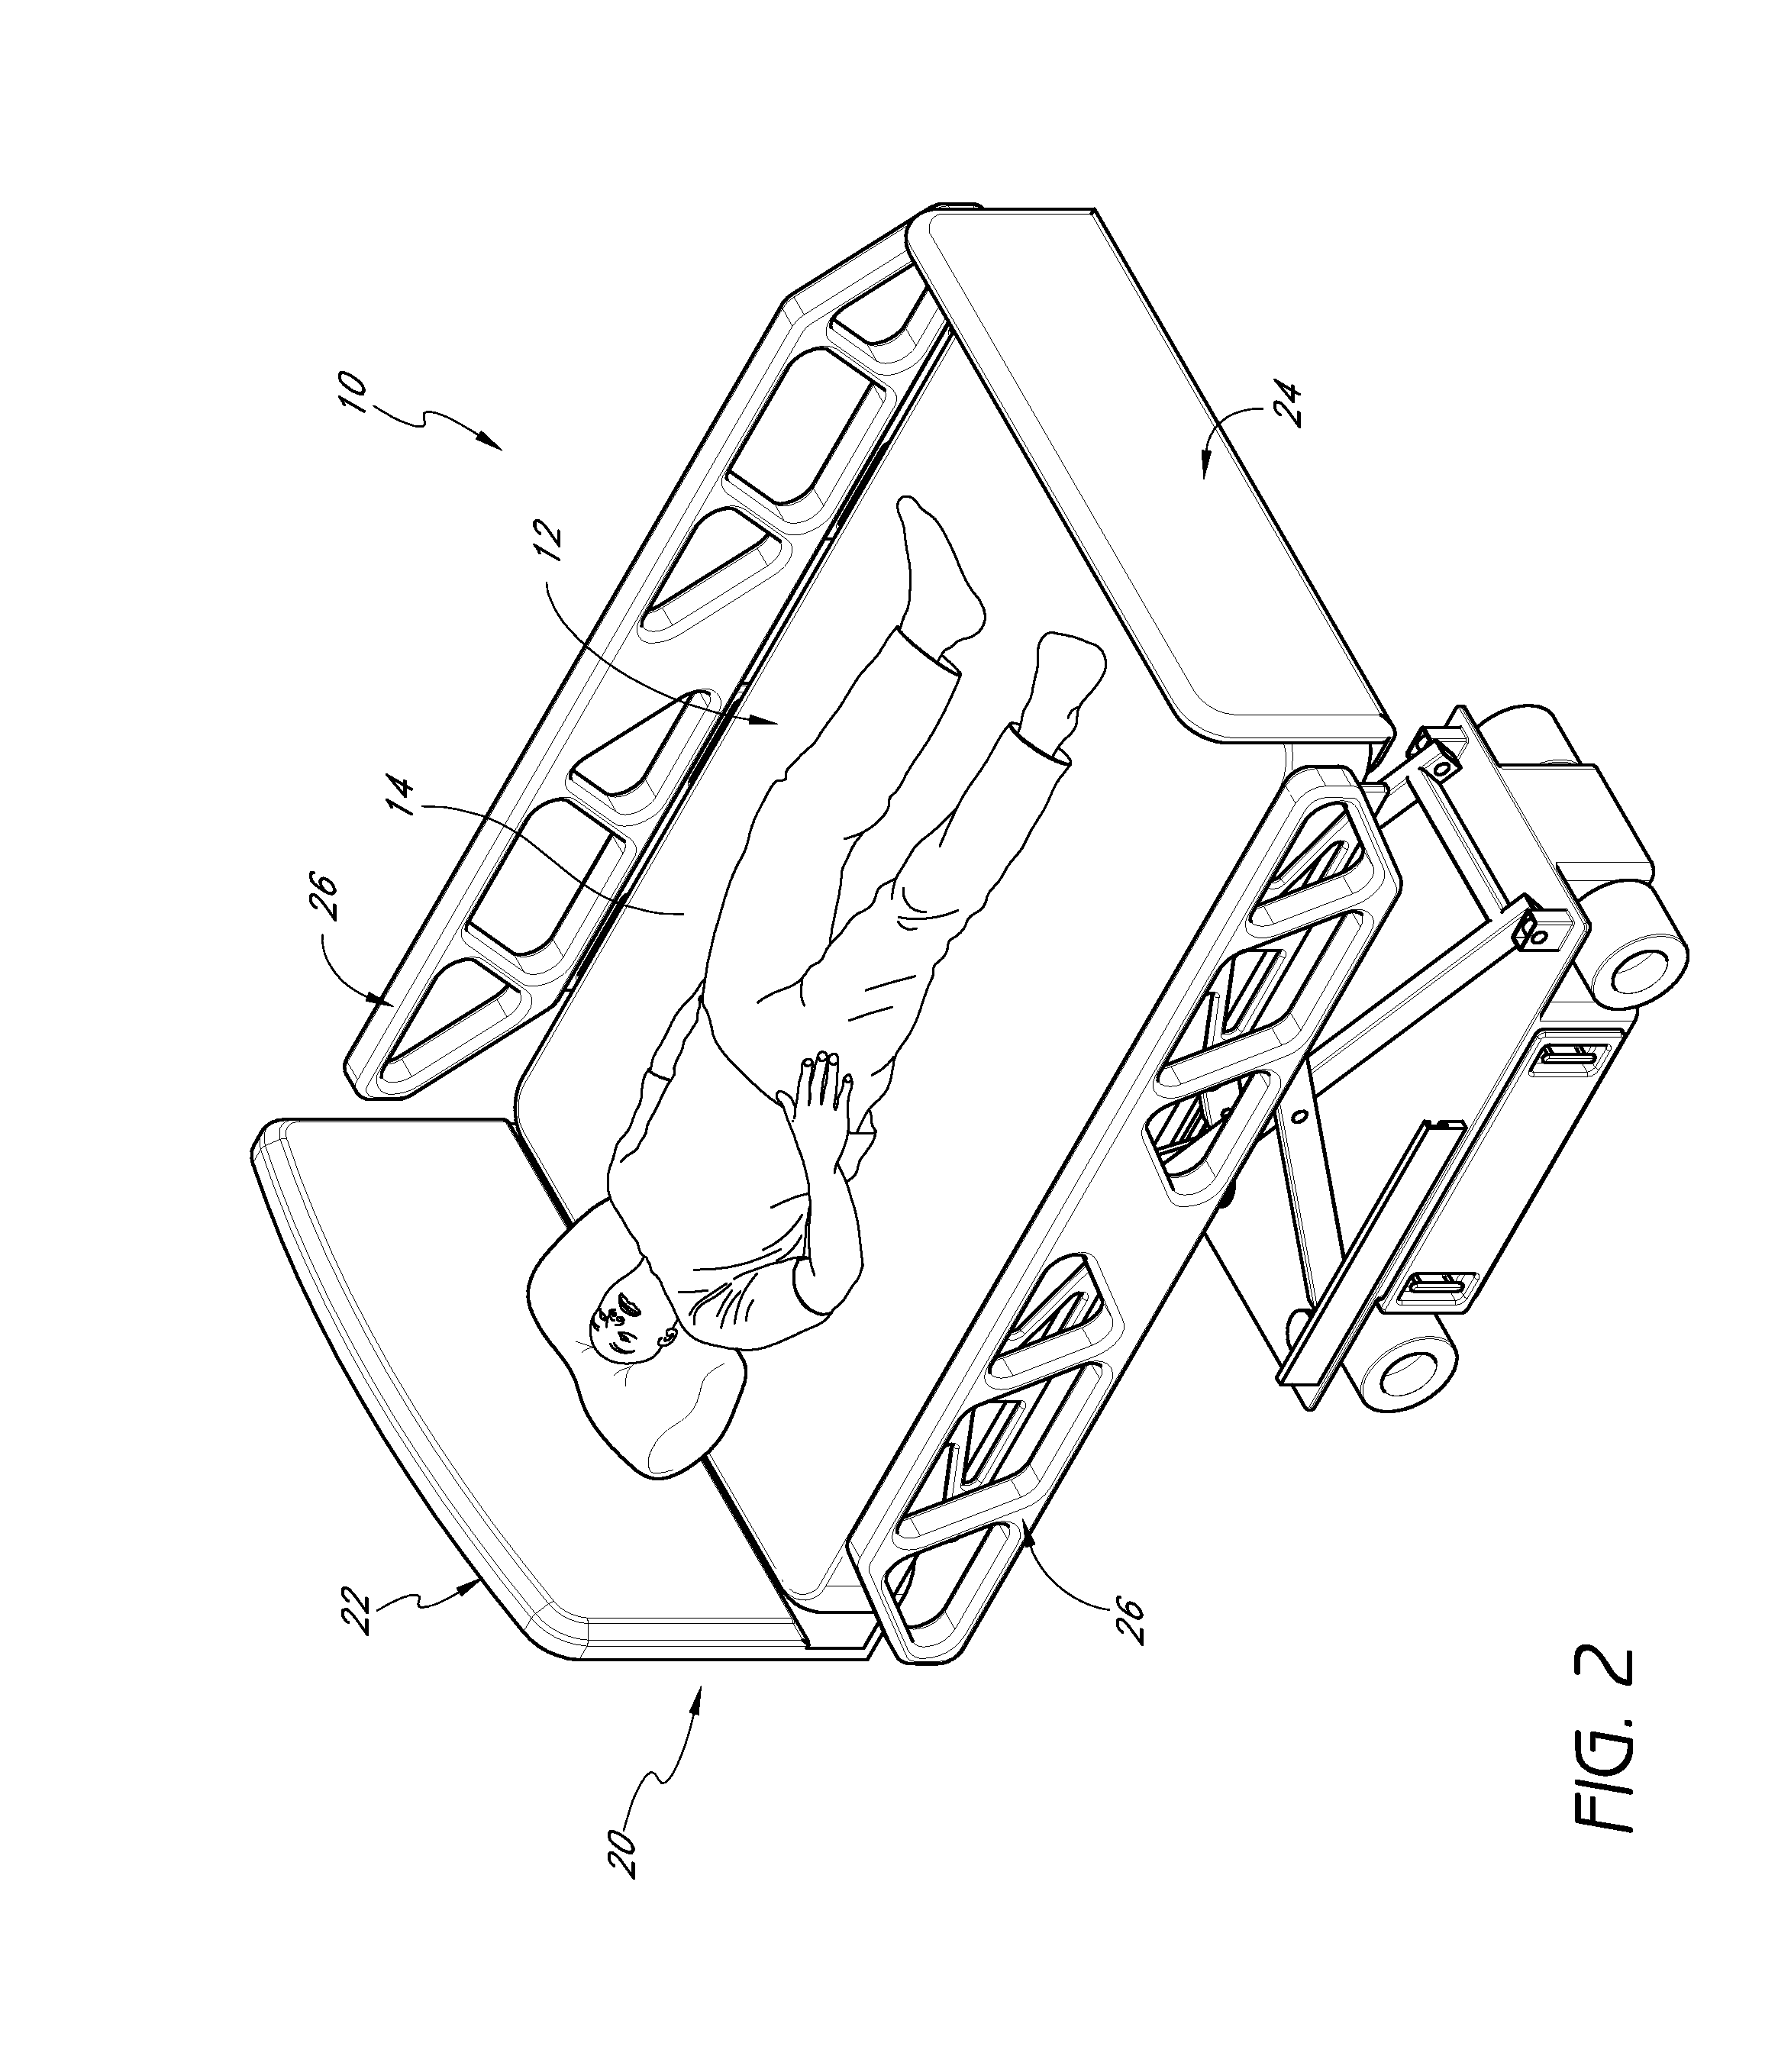 Patient safety system with automatically adjusting bed